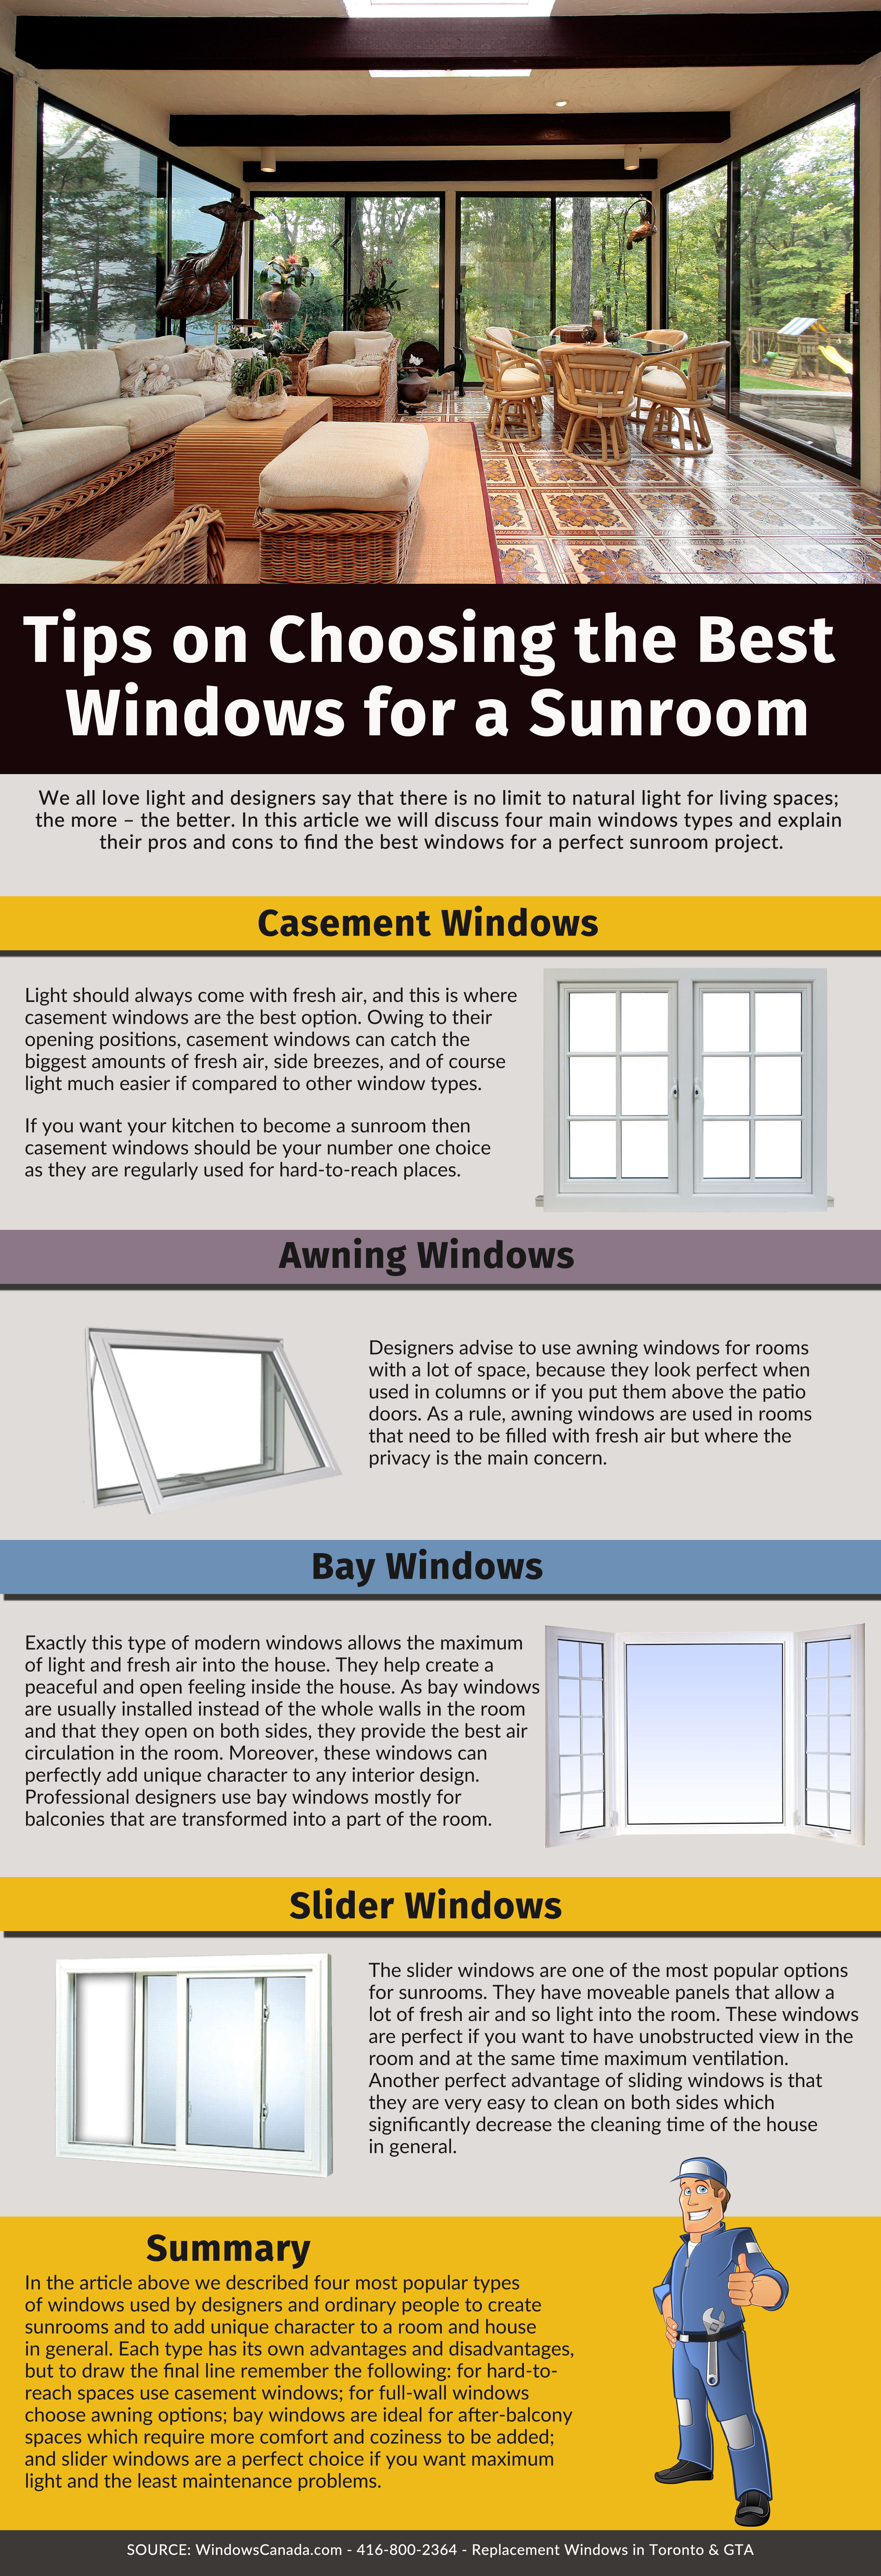 Tips on Choosing the Best Windows for a Sunroom